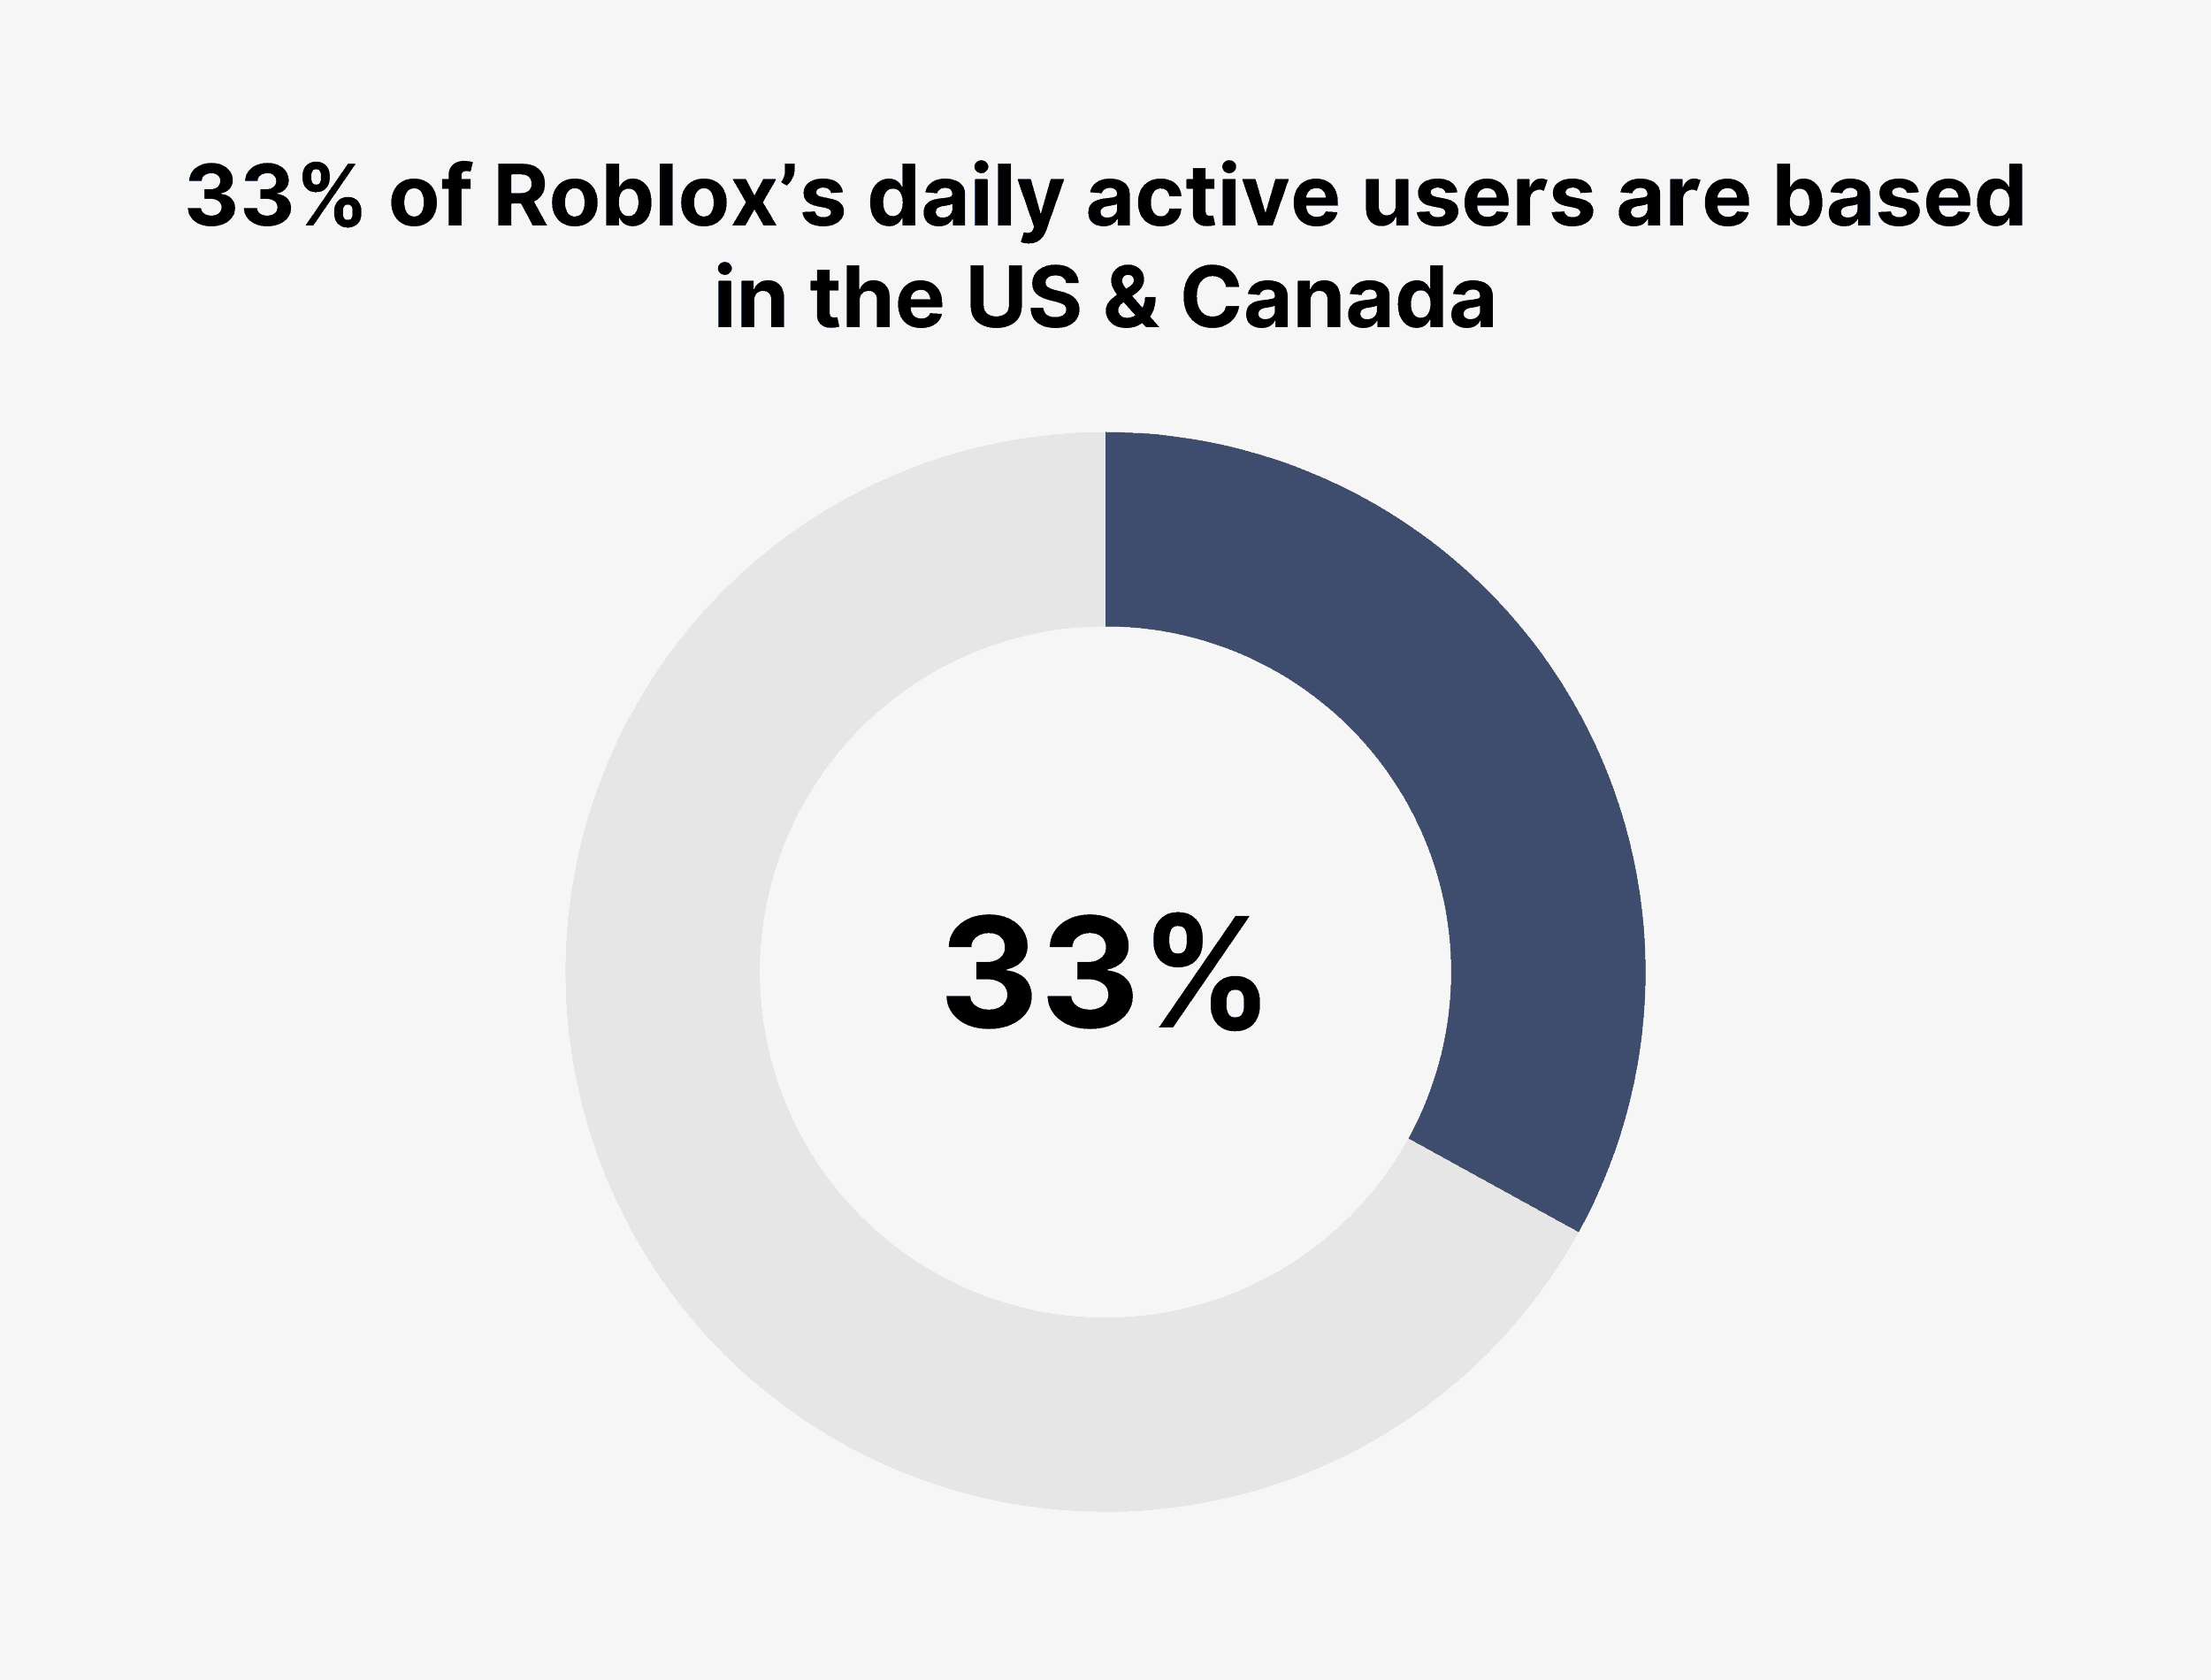 33% of Roblox’s daily active users are based in the US & Canada